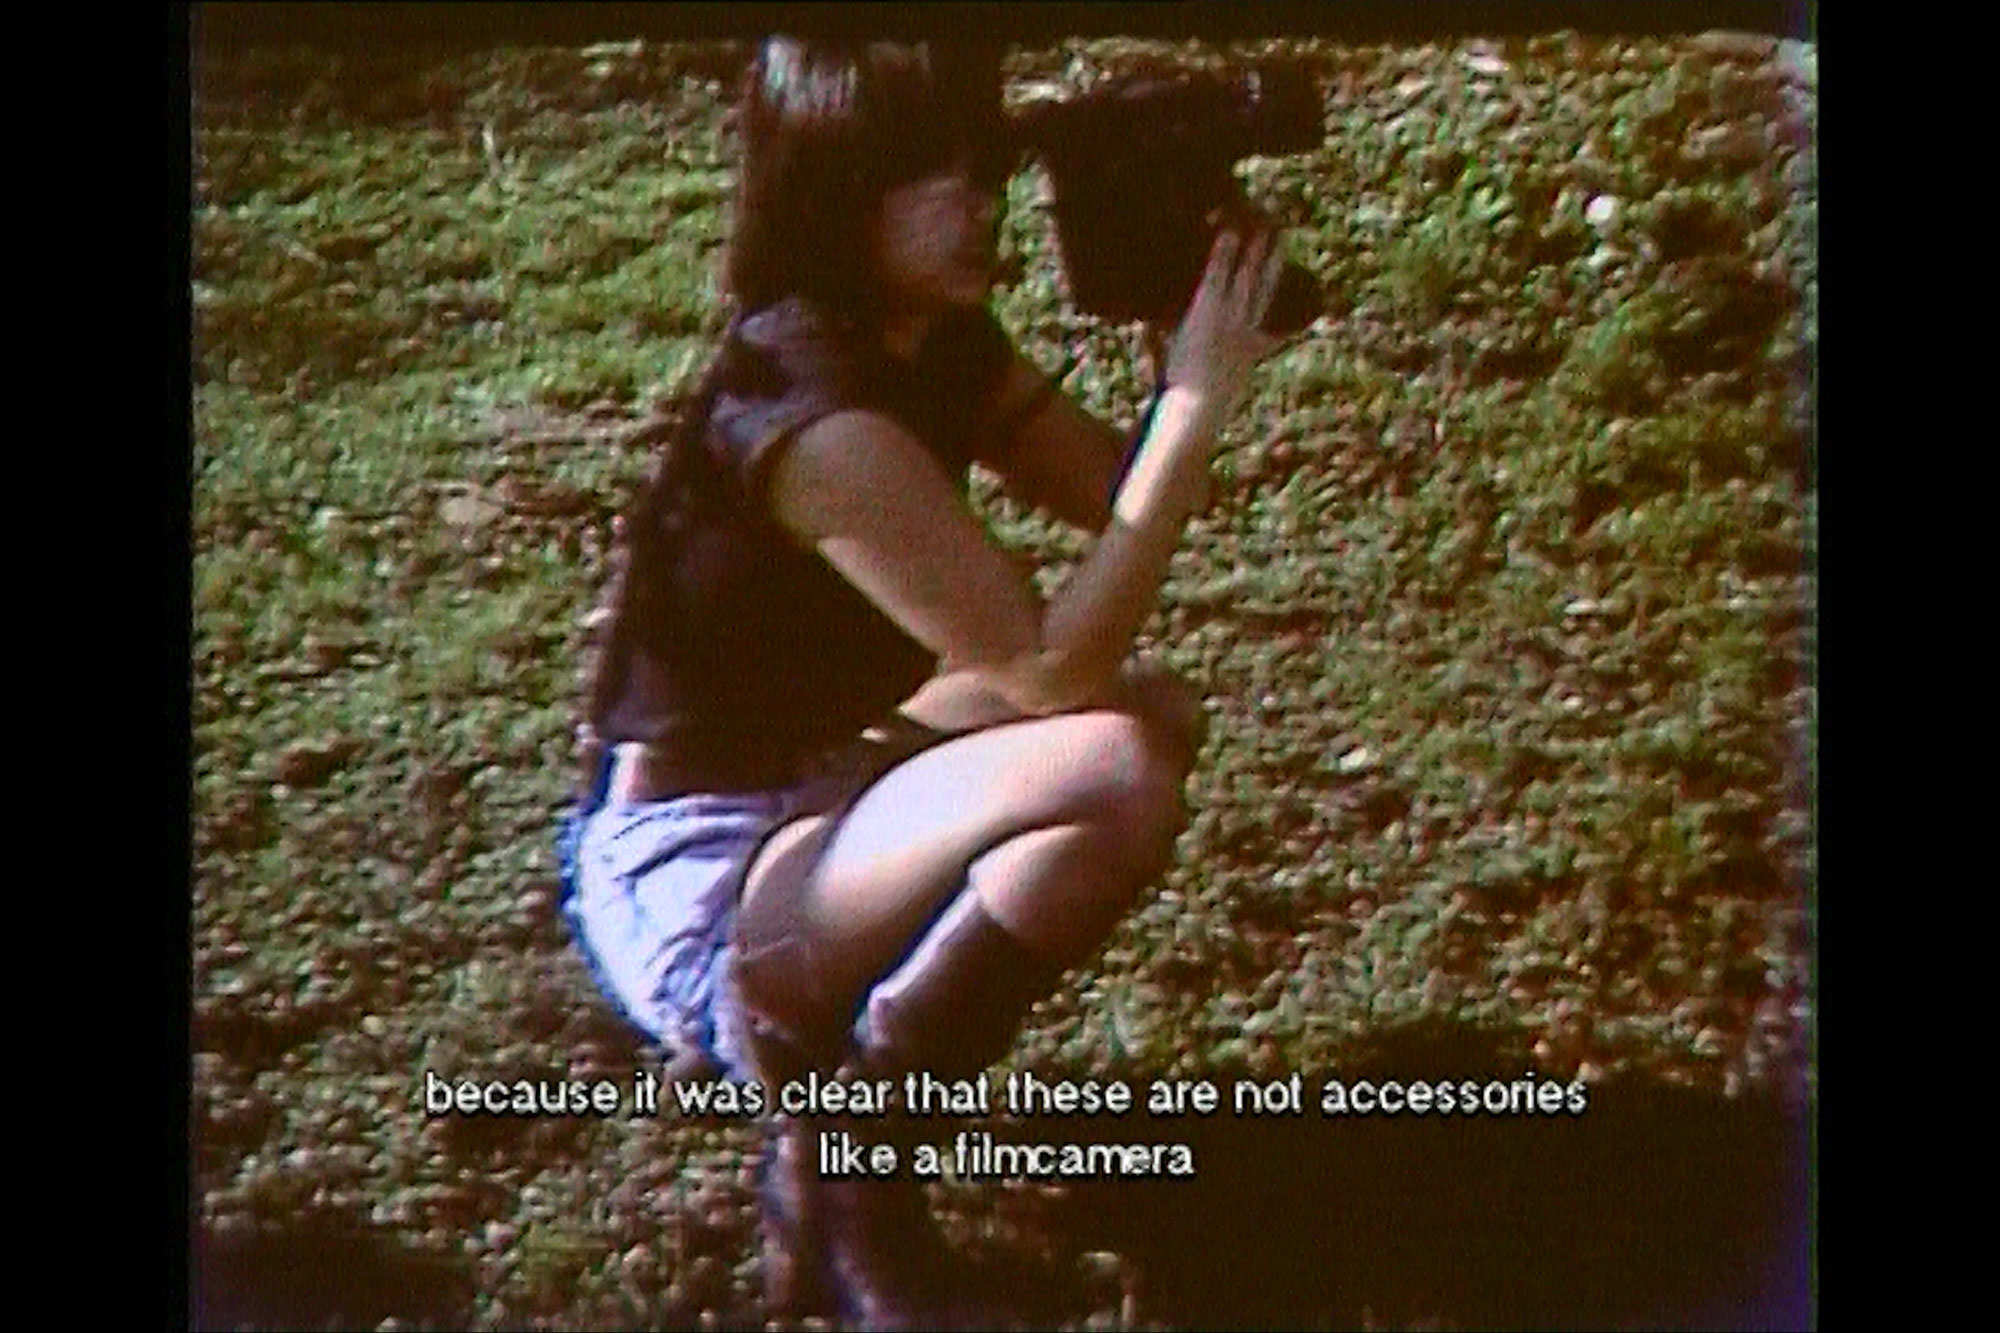 An asian woman wearing a black top and jean shorts squatting in the grass shooting with a VHS camera, Because it was clear that these are not accessories like a film camera. 